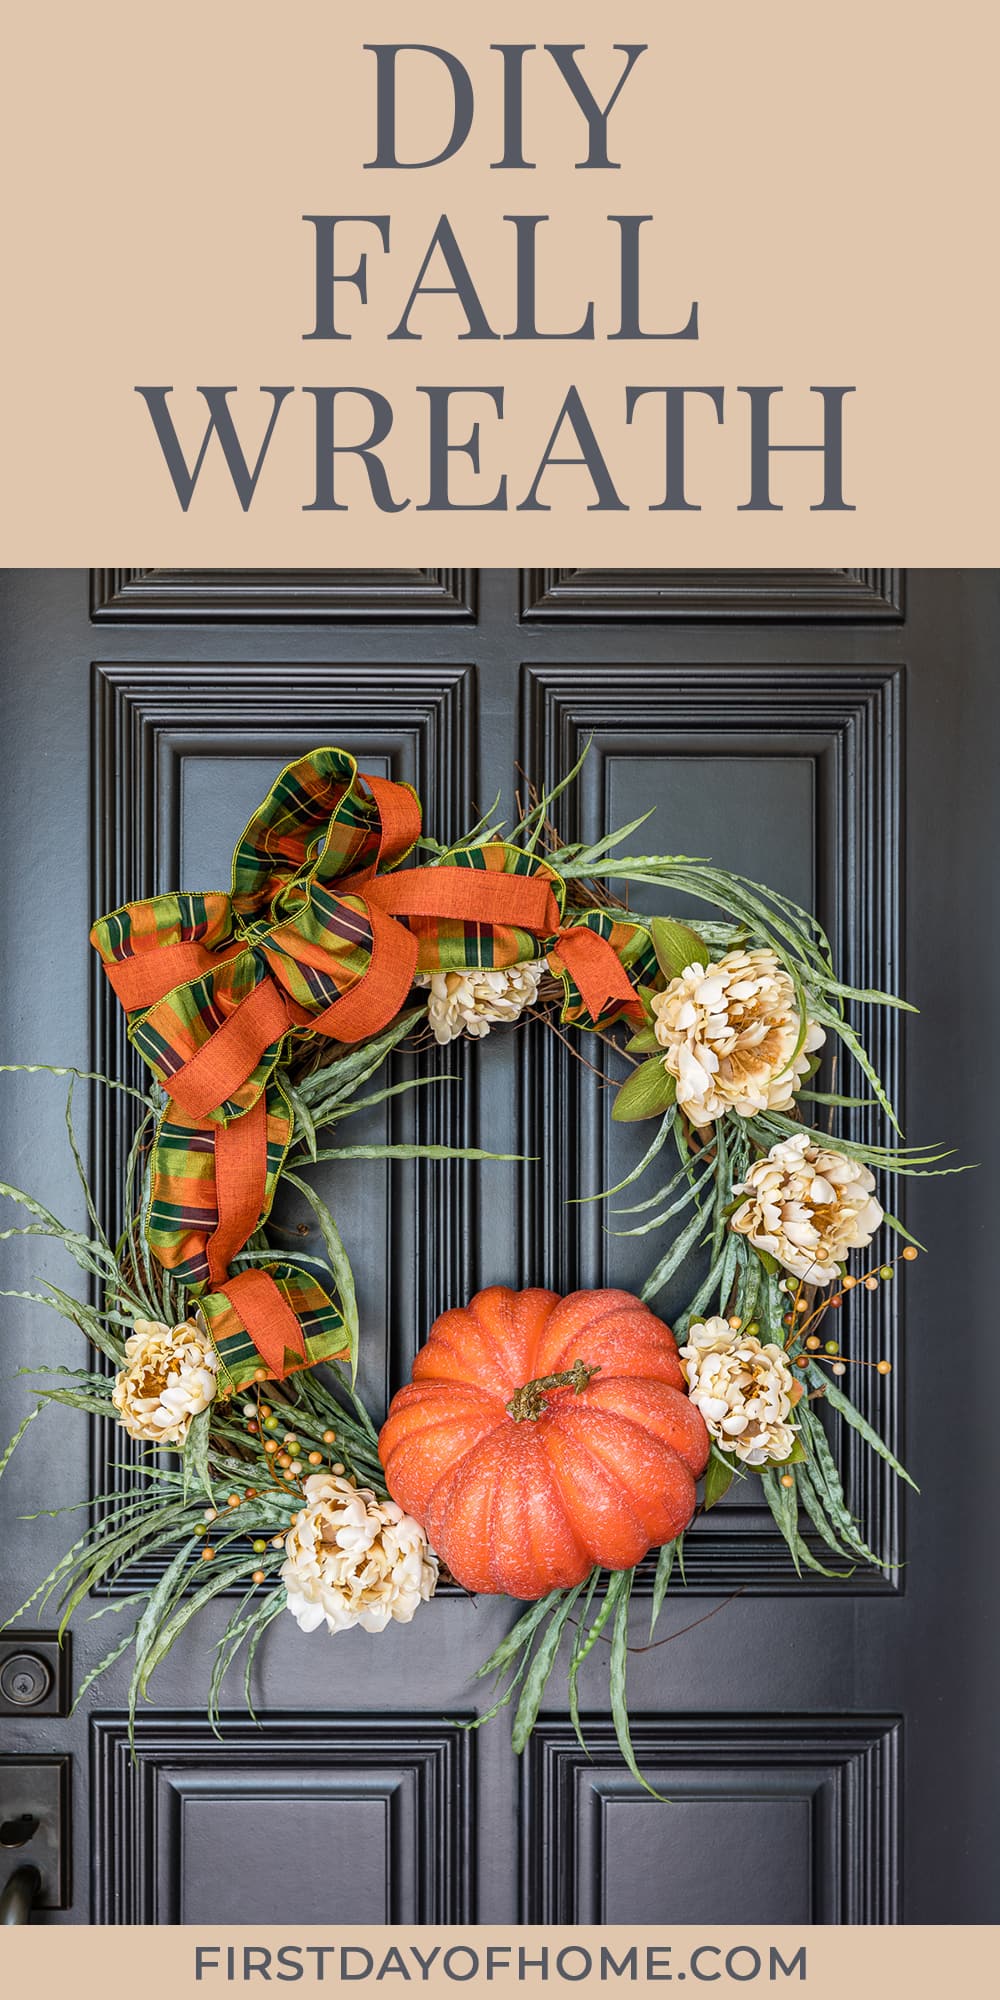 Fall wreath decorated with a large pumpkin, peonies, greenery, and ribbon. Text overlay reads "DIY Fall Wreath".